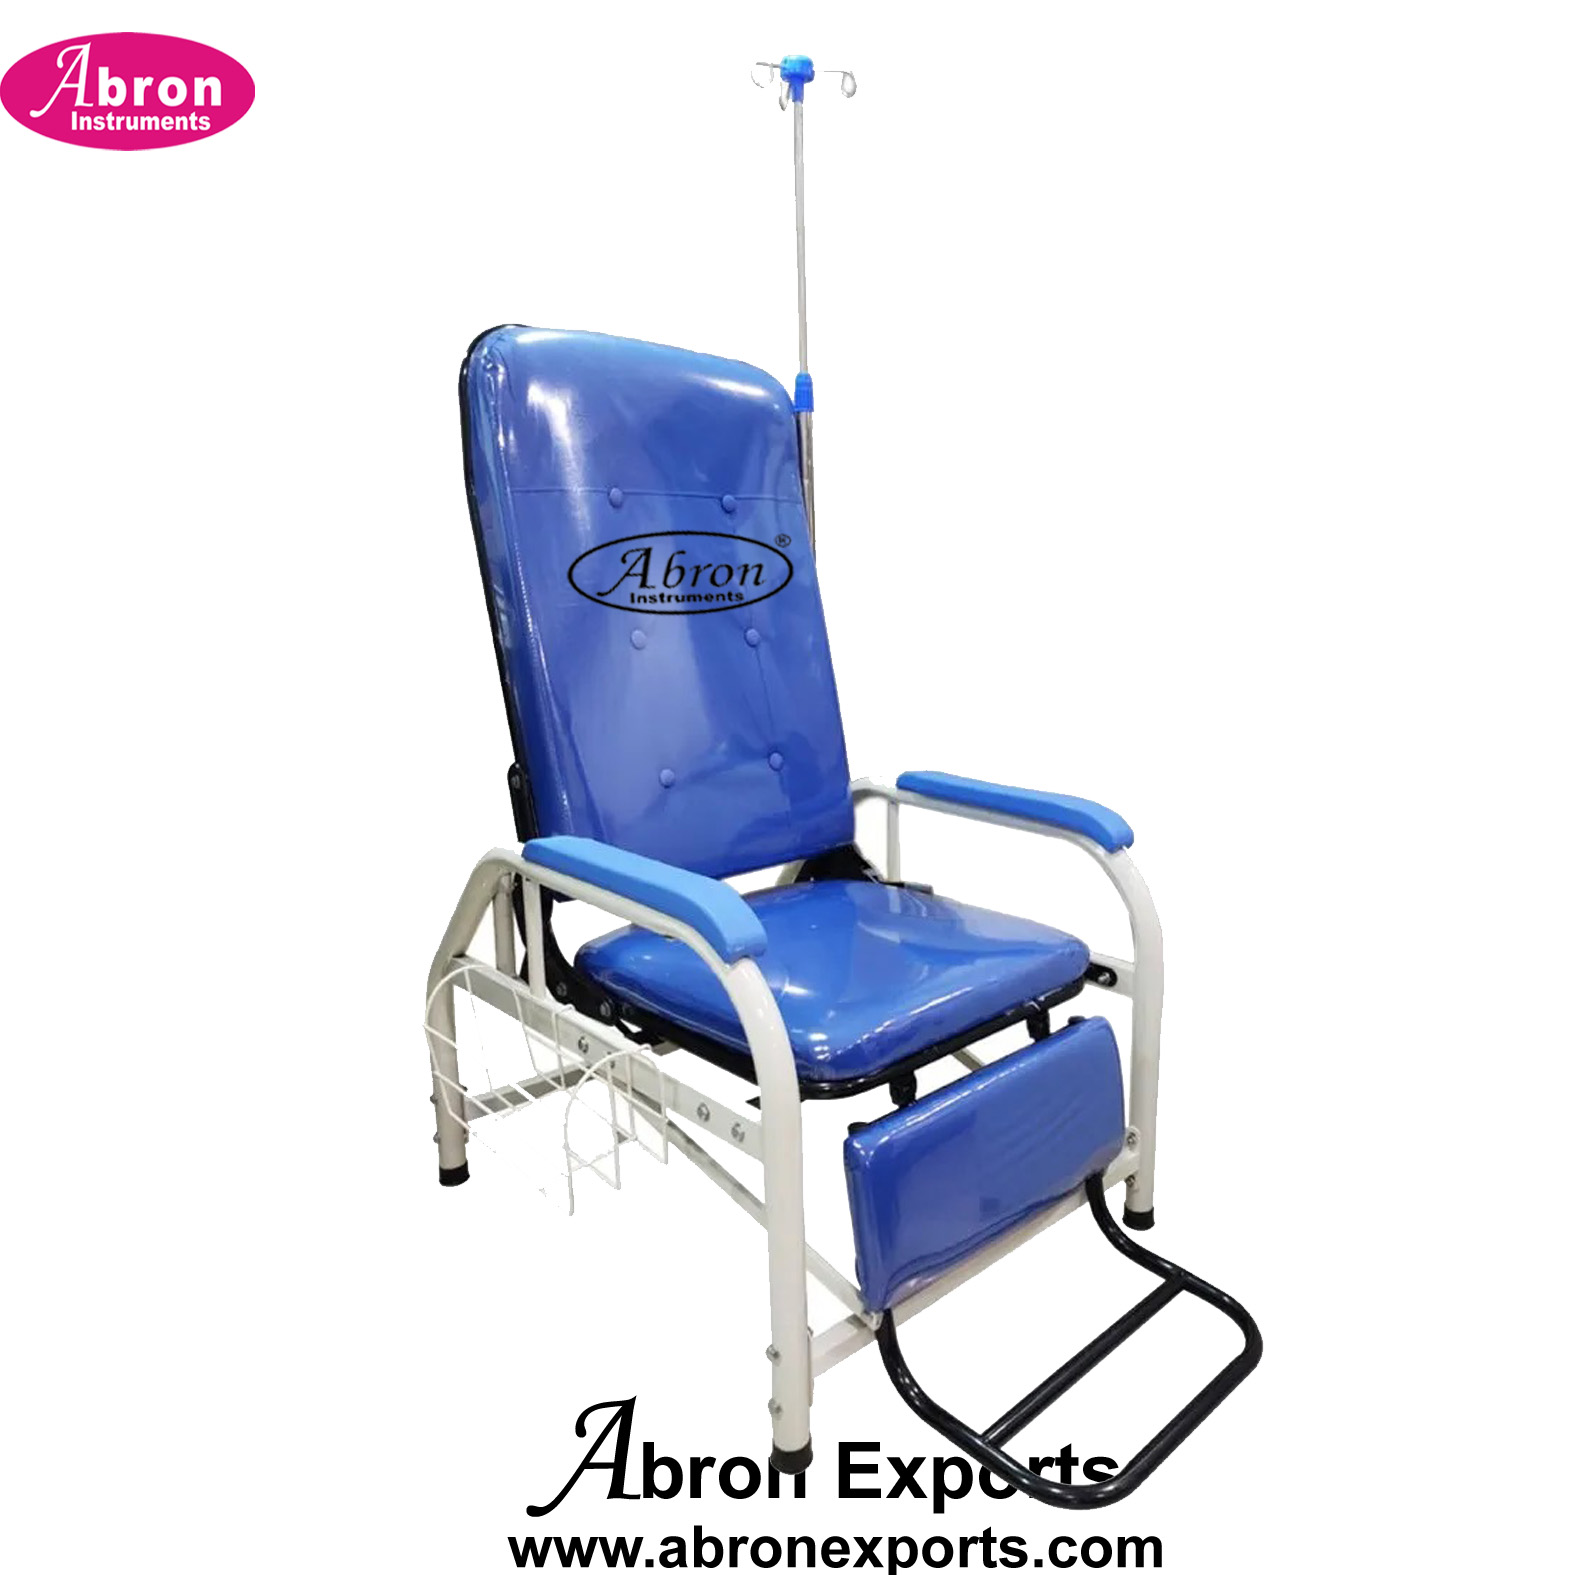 Hospital Blood Bank collection chair with IV stand Surgical Medical Nursing Home Abron ABM-2275BCHI 